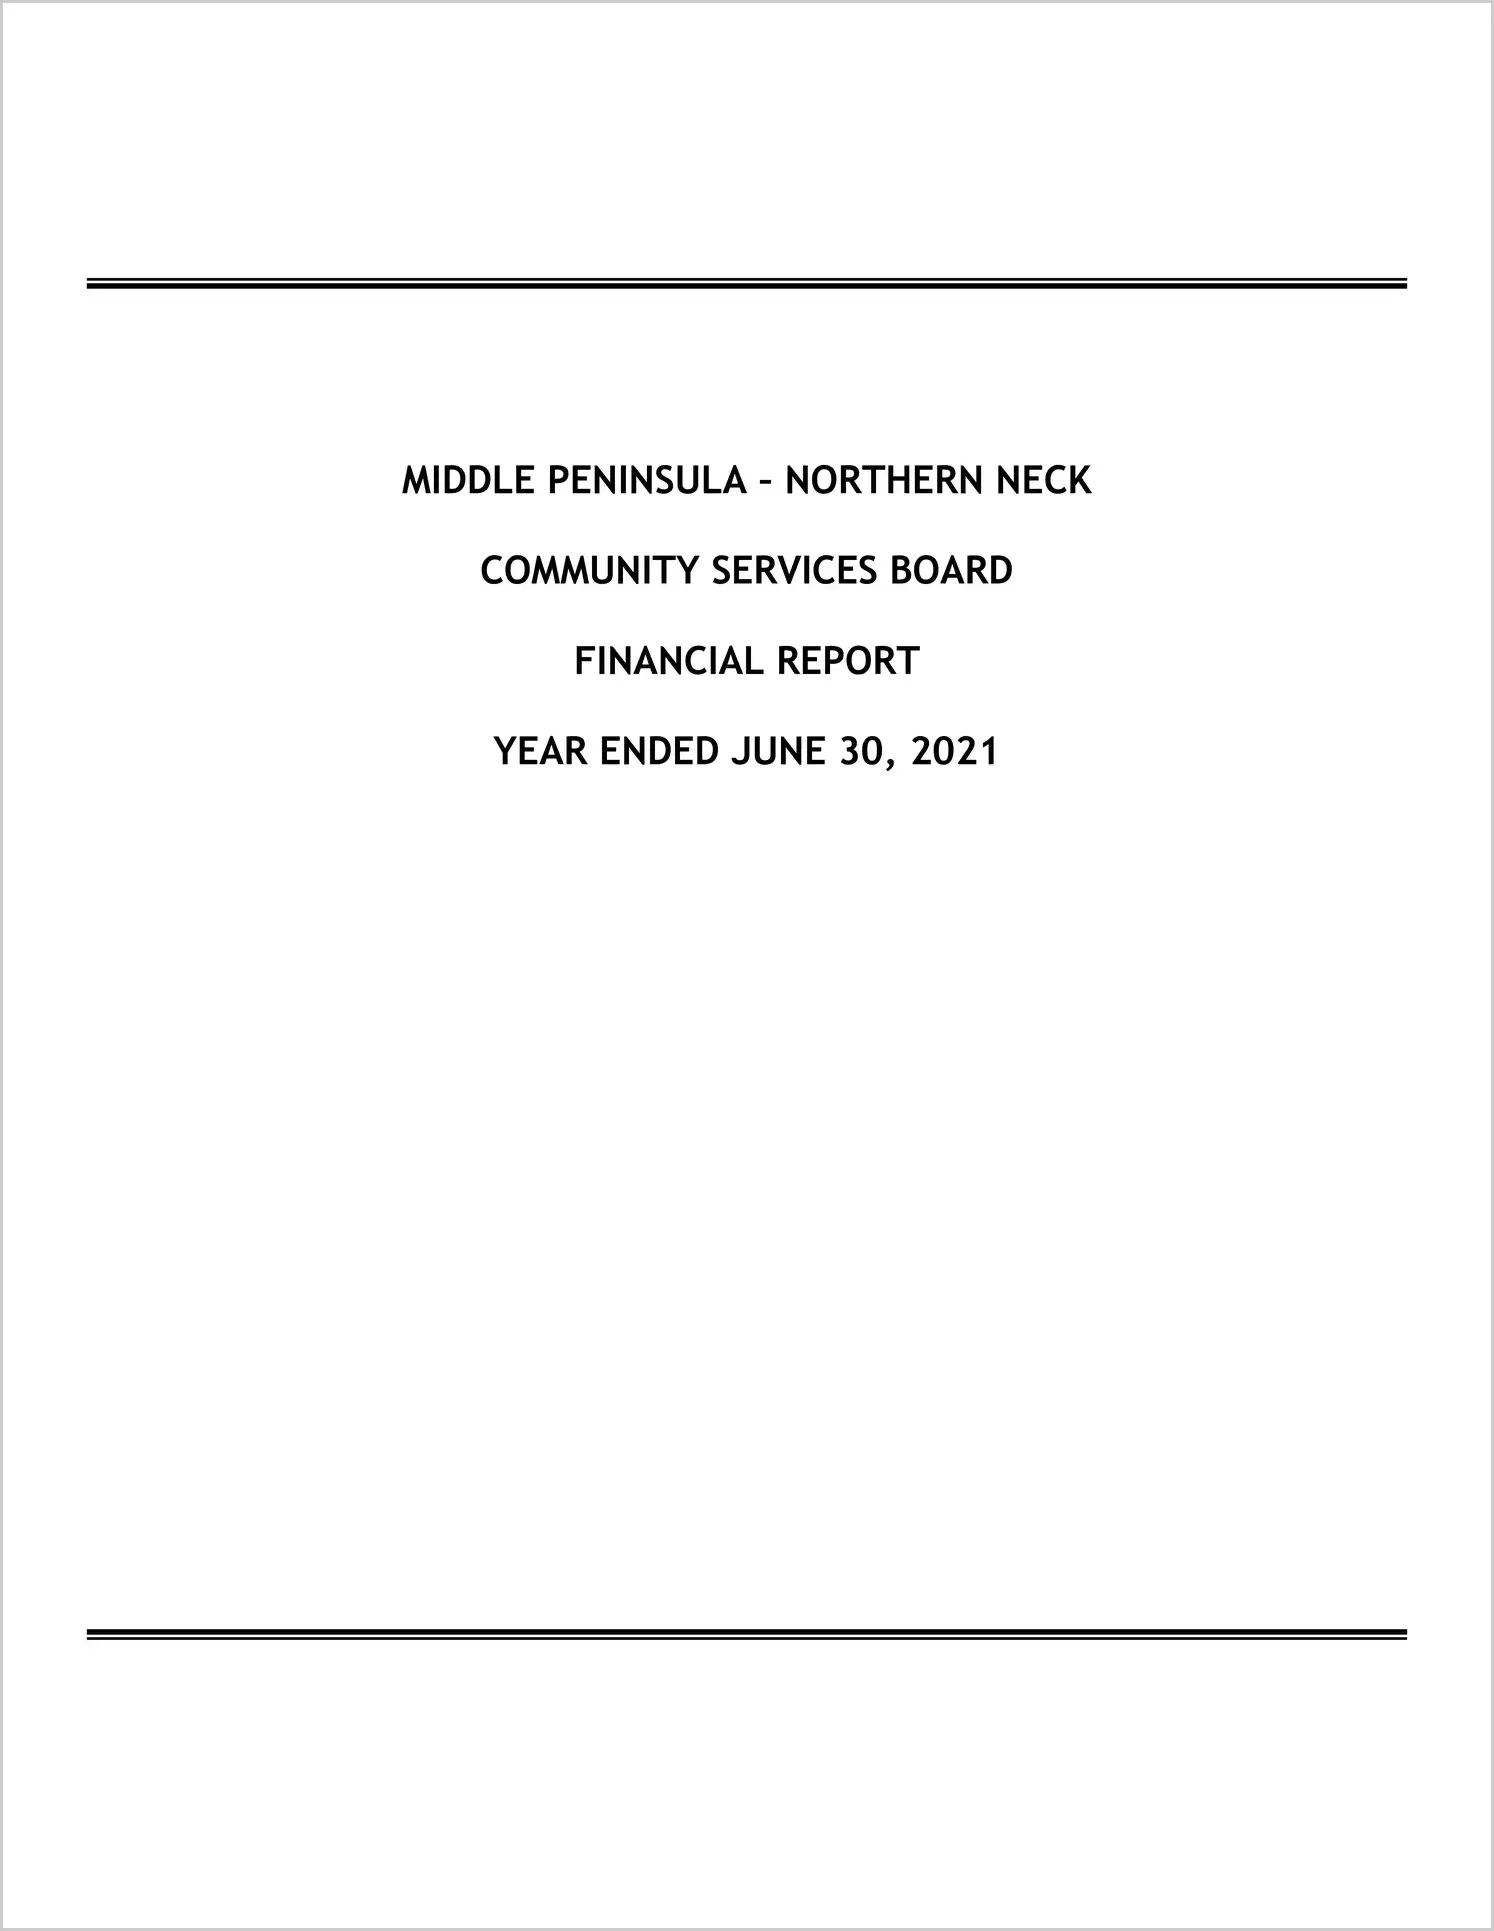 2021 ABC/Other Annual Financial Report  for Middle Peninsula Northern Neck Community Services Board